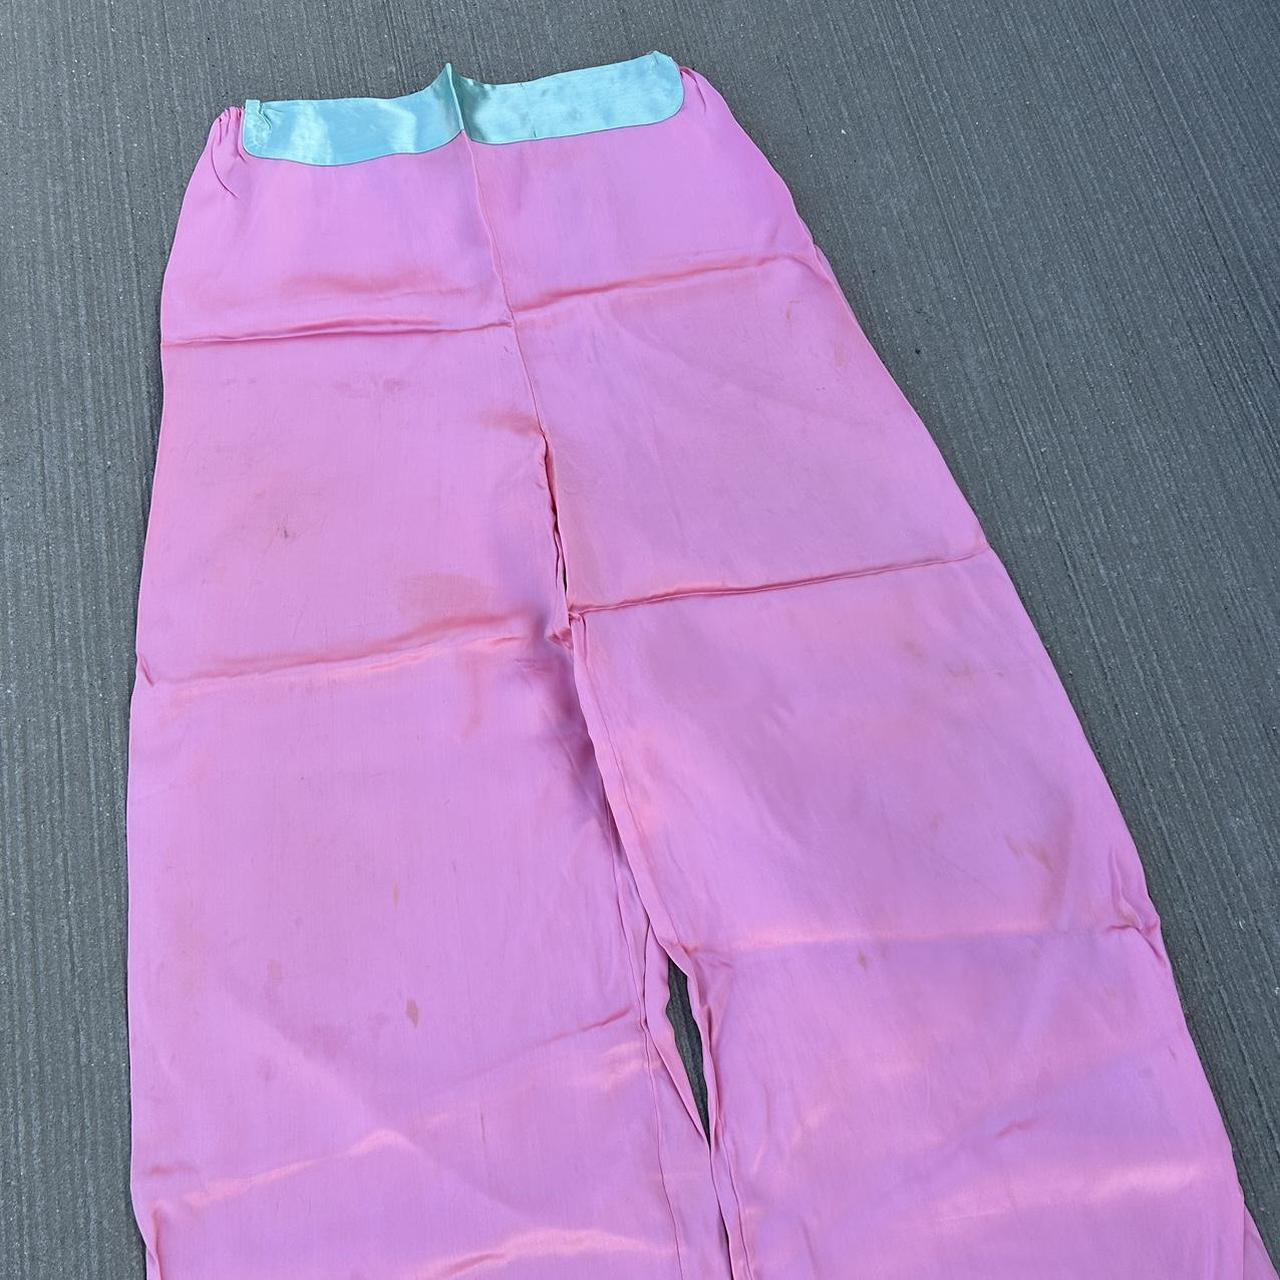 Basement Men's Pink and Blue Trousers (4)